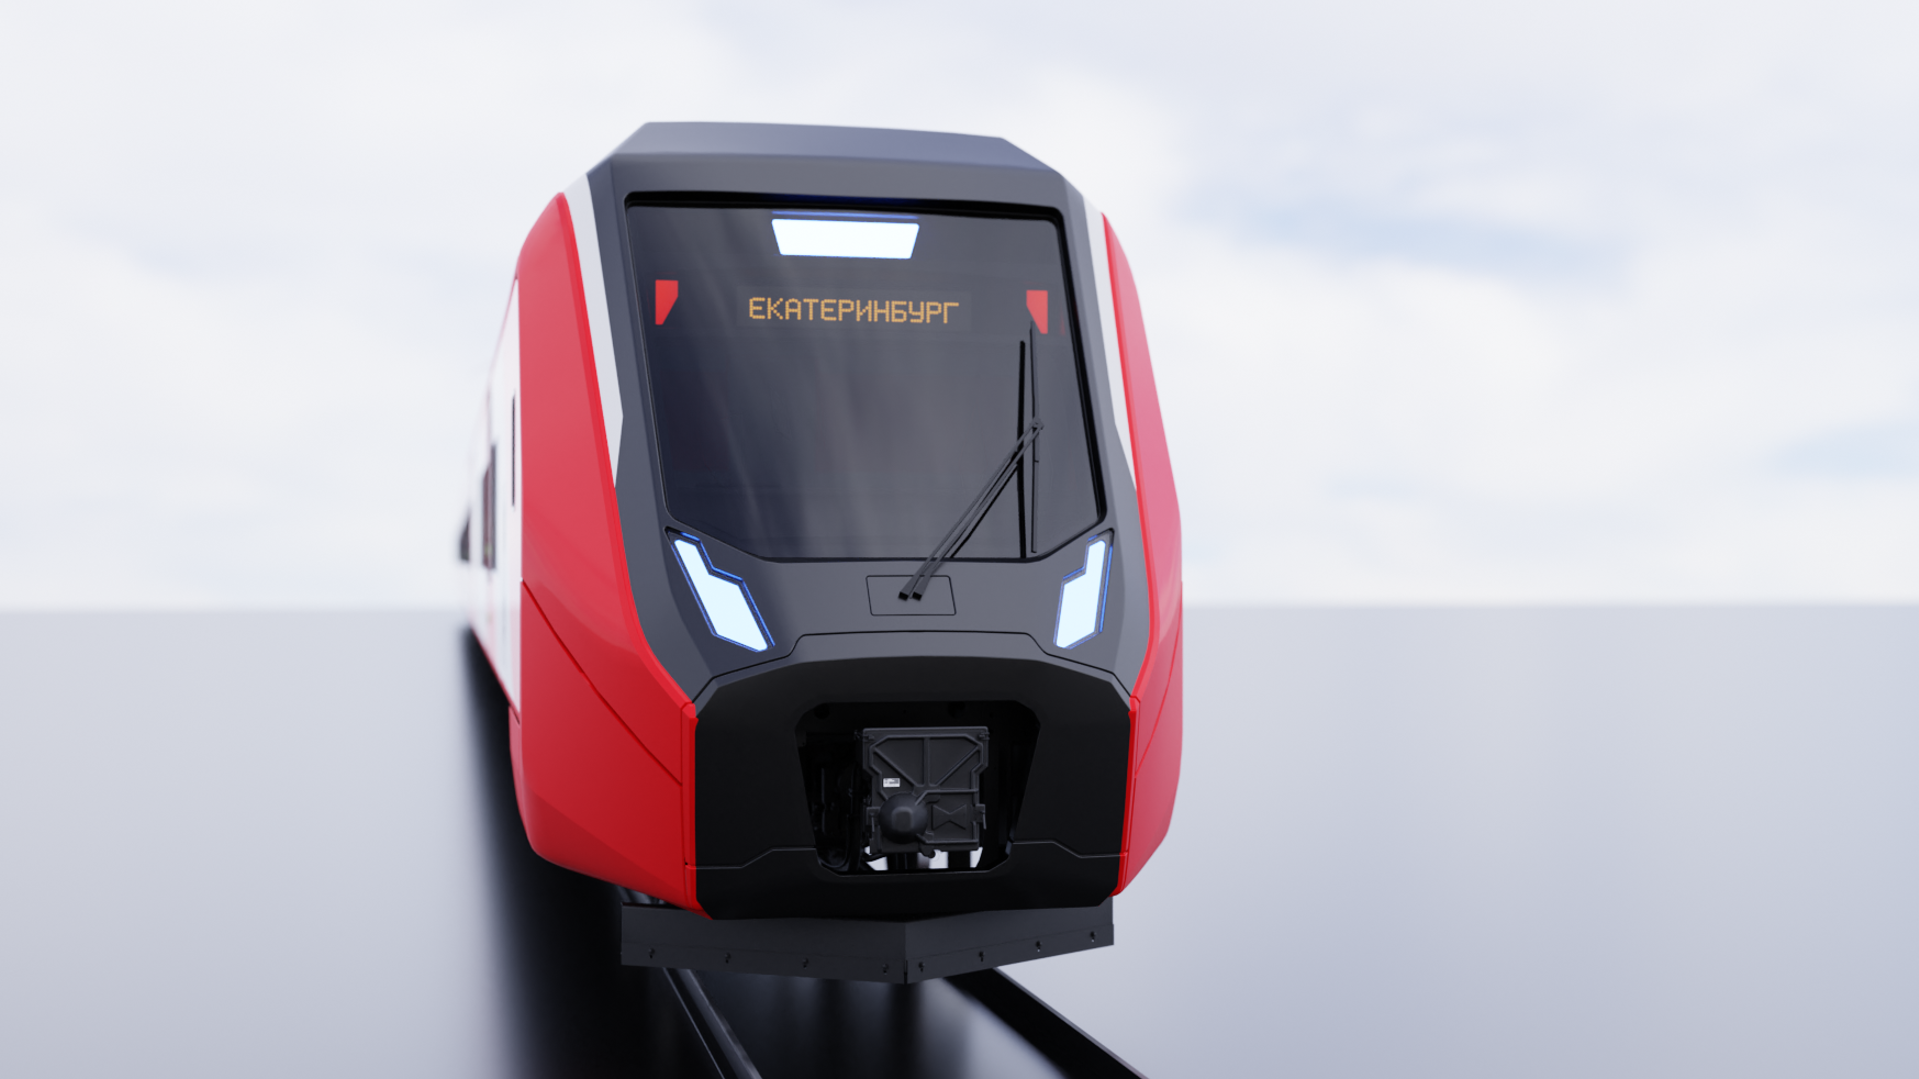 Render of a promising Vostok train, being developed by Ural Locomotives, was presented at the Innoprom exhibition in summer 2022